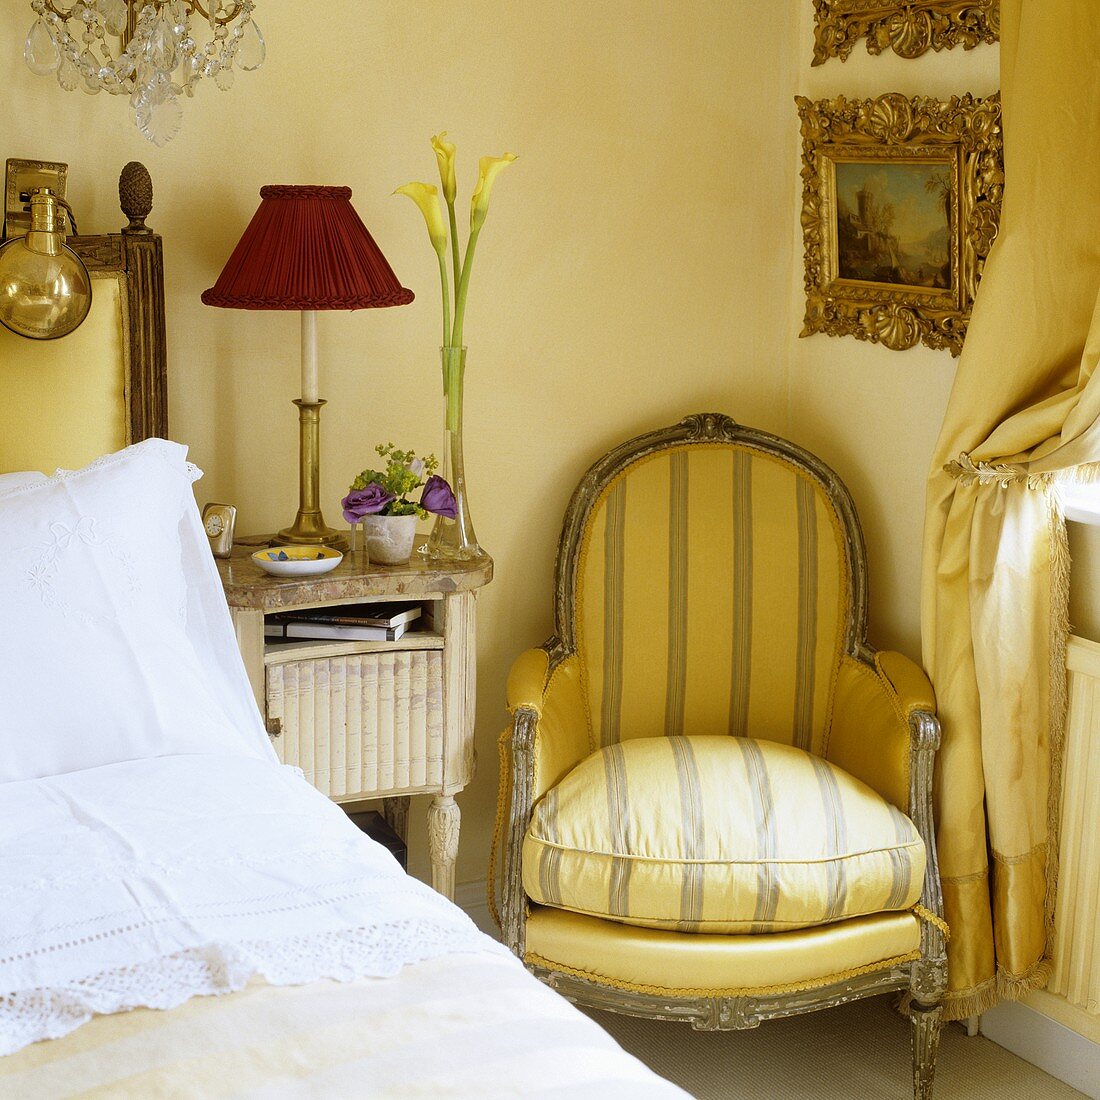 An antique armchair next to a bedside table with a lamp with a red shade in the corner of a bedroom